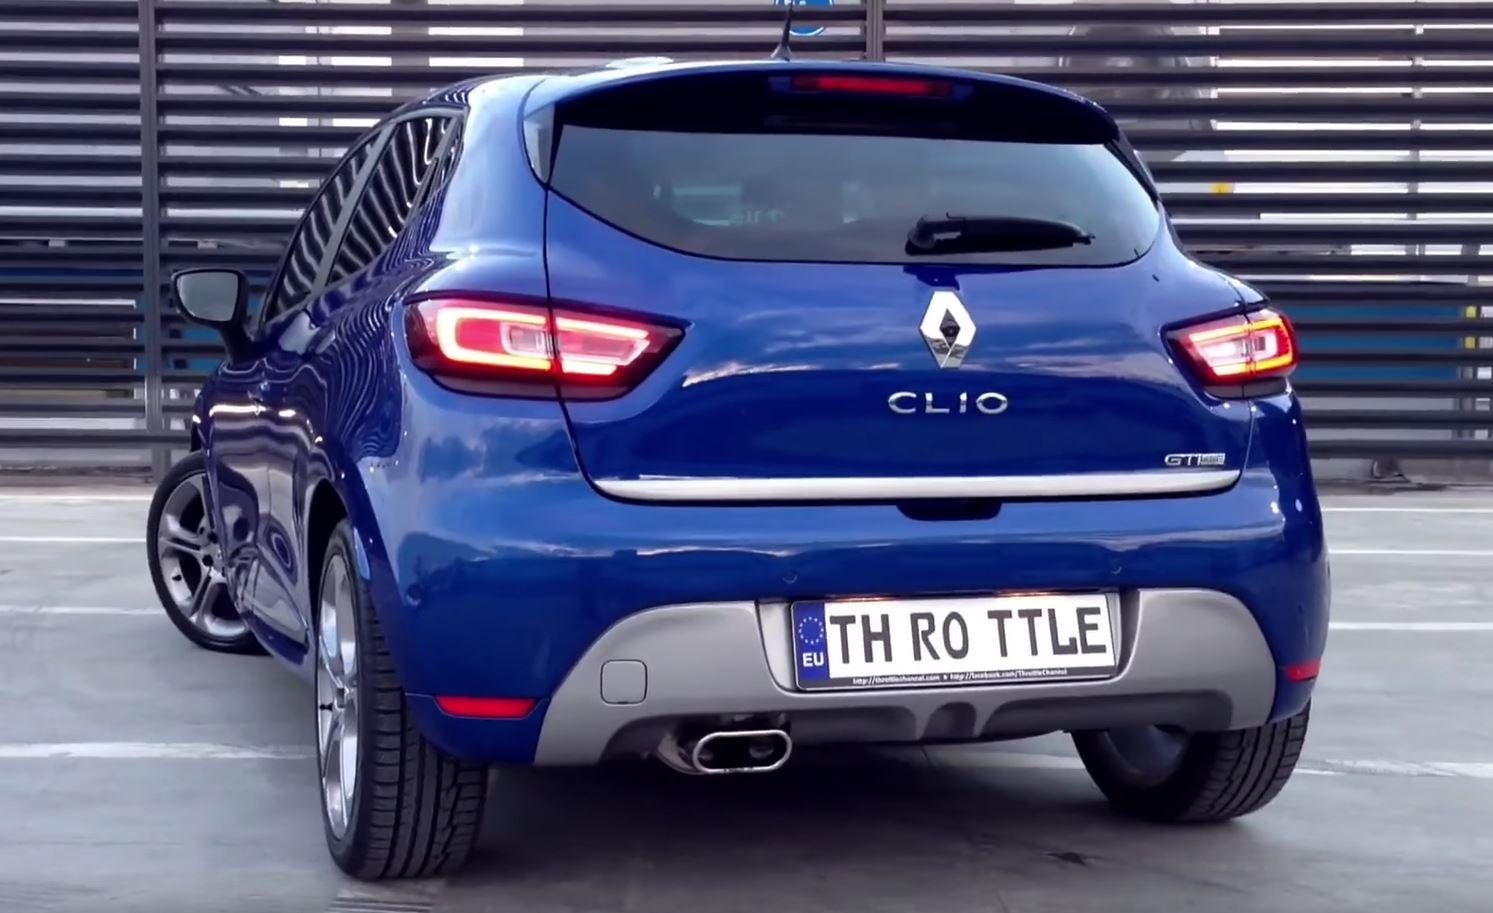 Waakzaam rechter Rechthoek 2017 Renault Clio 1.2 TCe Acceleration Test Proves Some Manuals Are Faster  - autoevolution